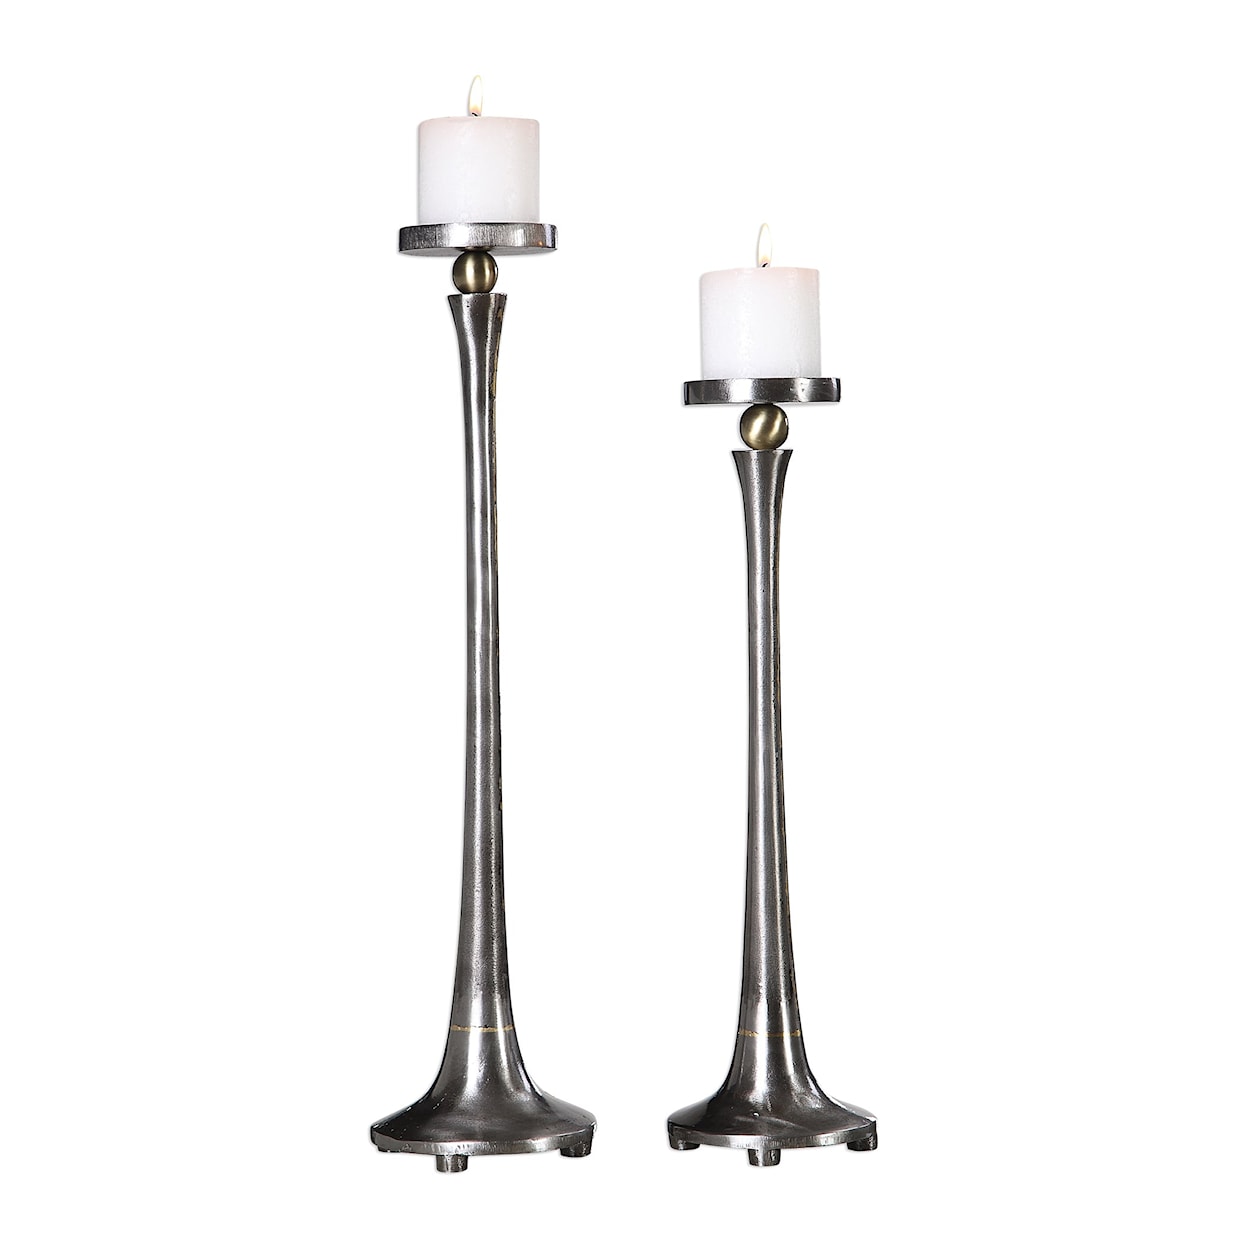 Uttermost Accessories - Candle Holders Aliso Cast Iron Candleholders (Set of 2)